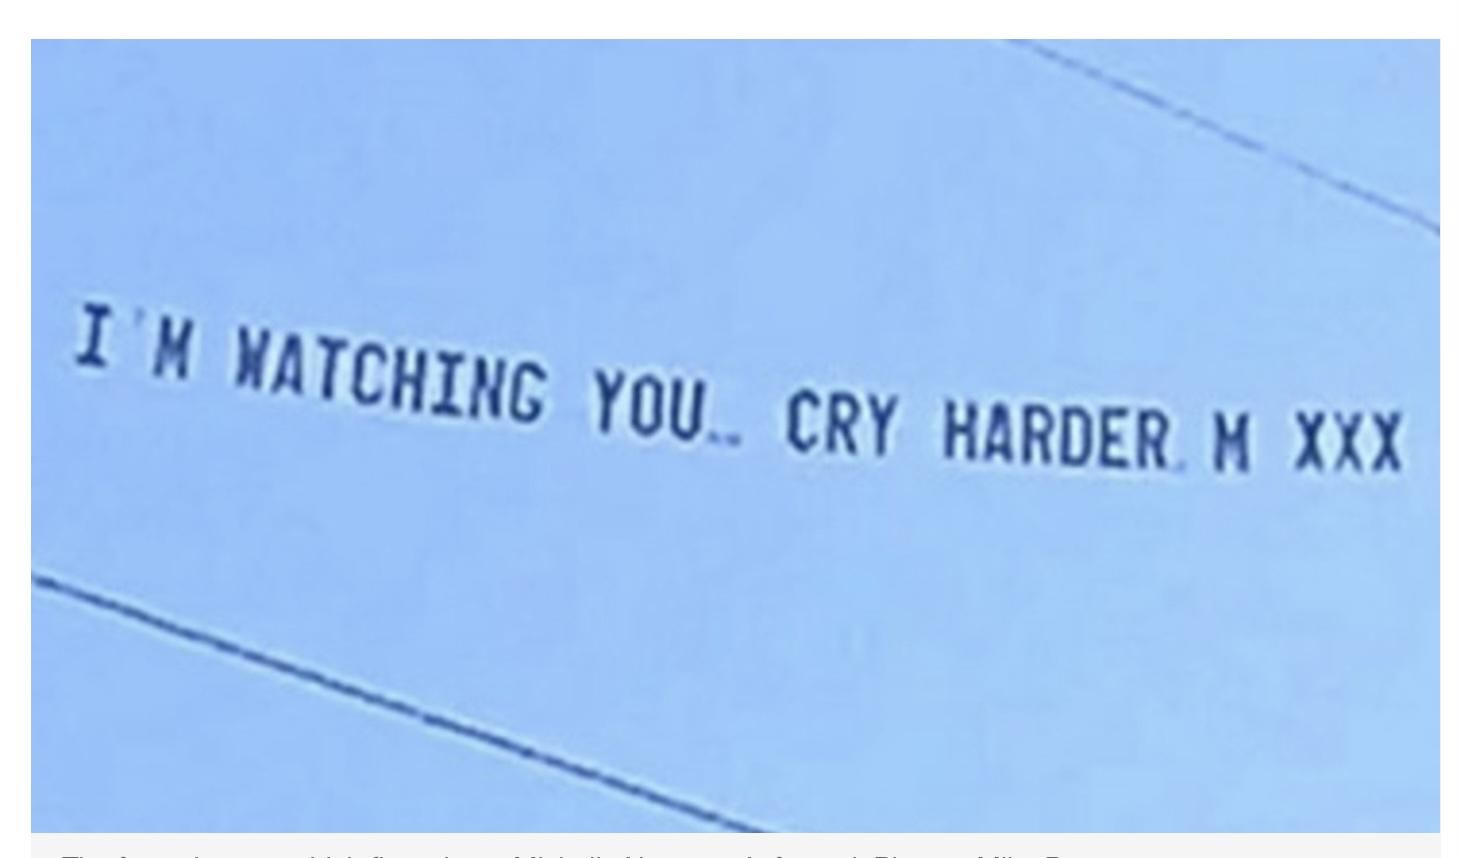 THIS FLEW OVER AN AUSTRALIAN WOMAN’S FUNERAL TODAY